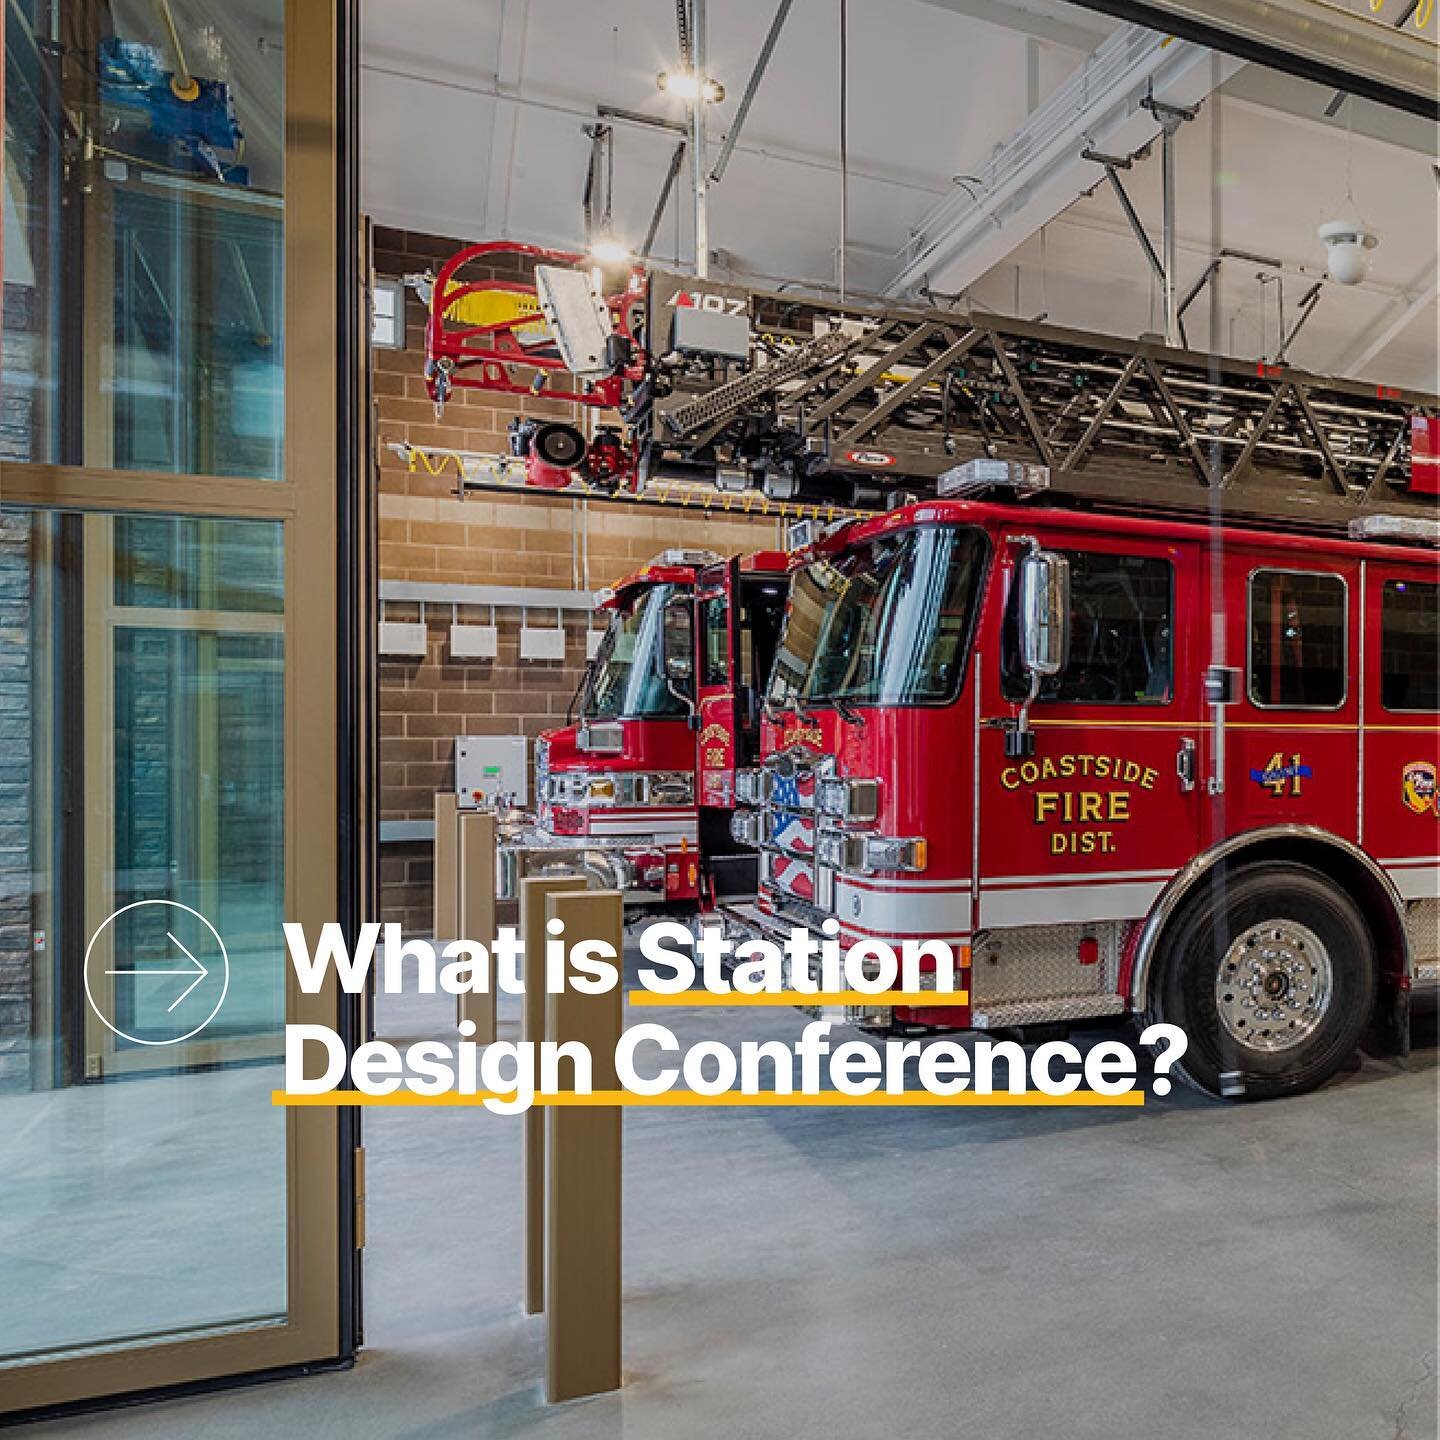 Mark your calendars - this year&rsquo;s Station Design Conference will take place May 22 to 25 in St. Louis, MO! This one of a kind learning and networking event brings together public safety officials, fire and police chiefs, companies, and project 